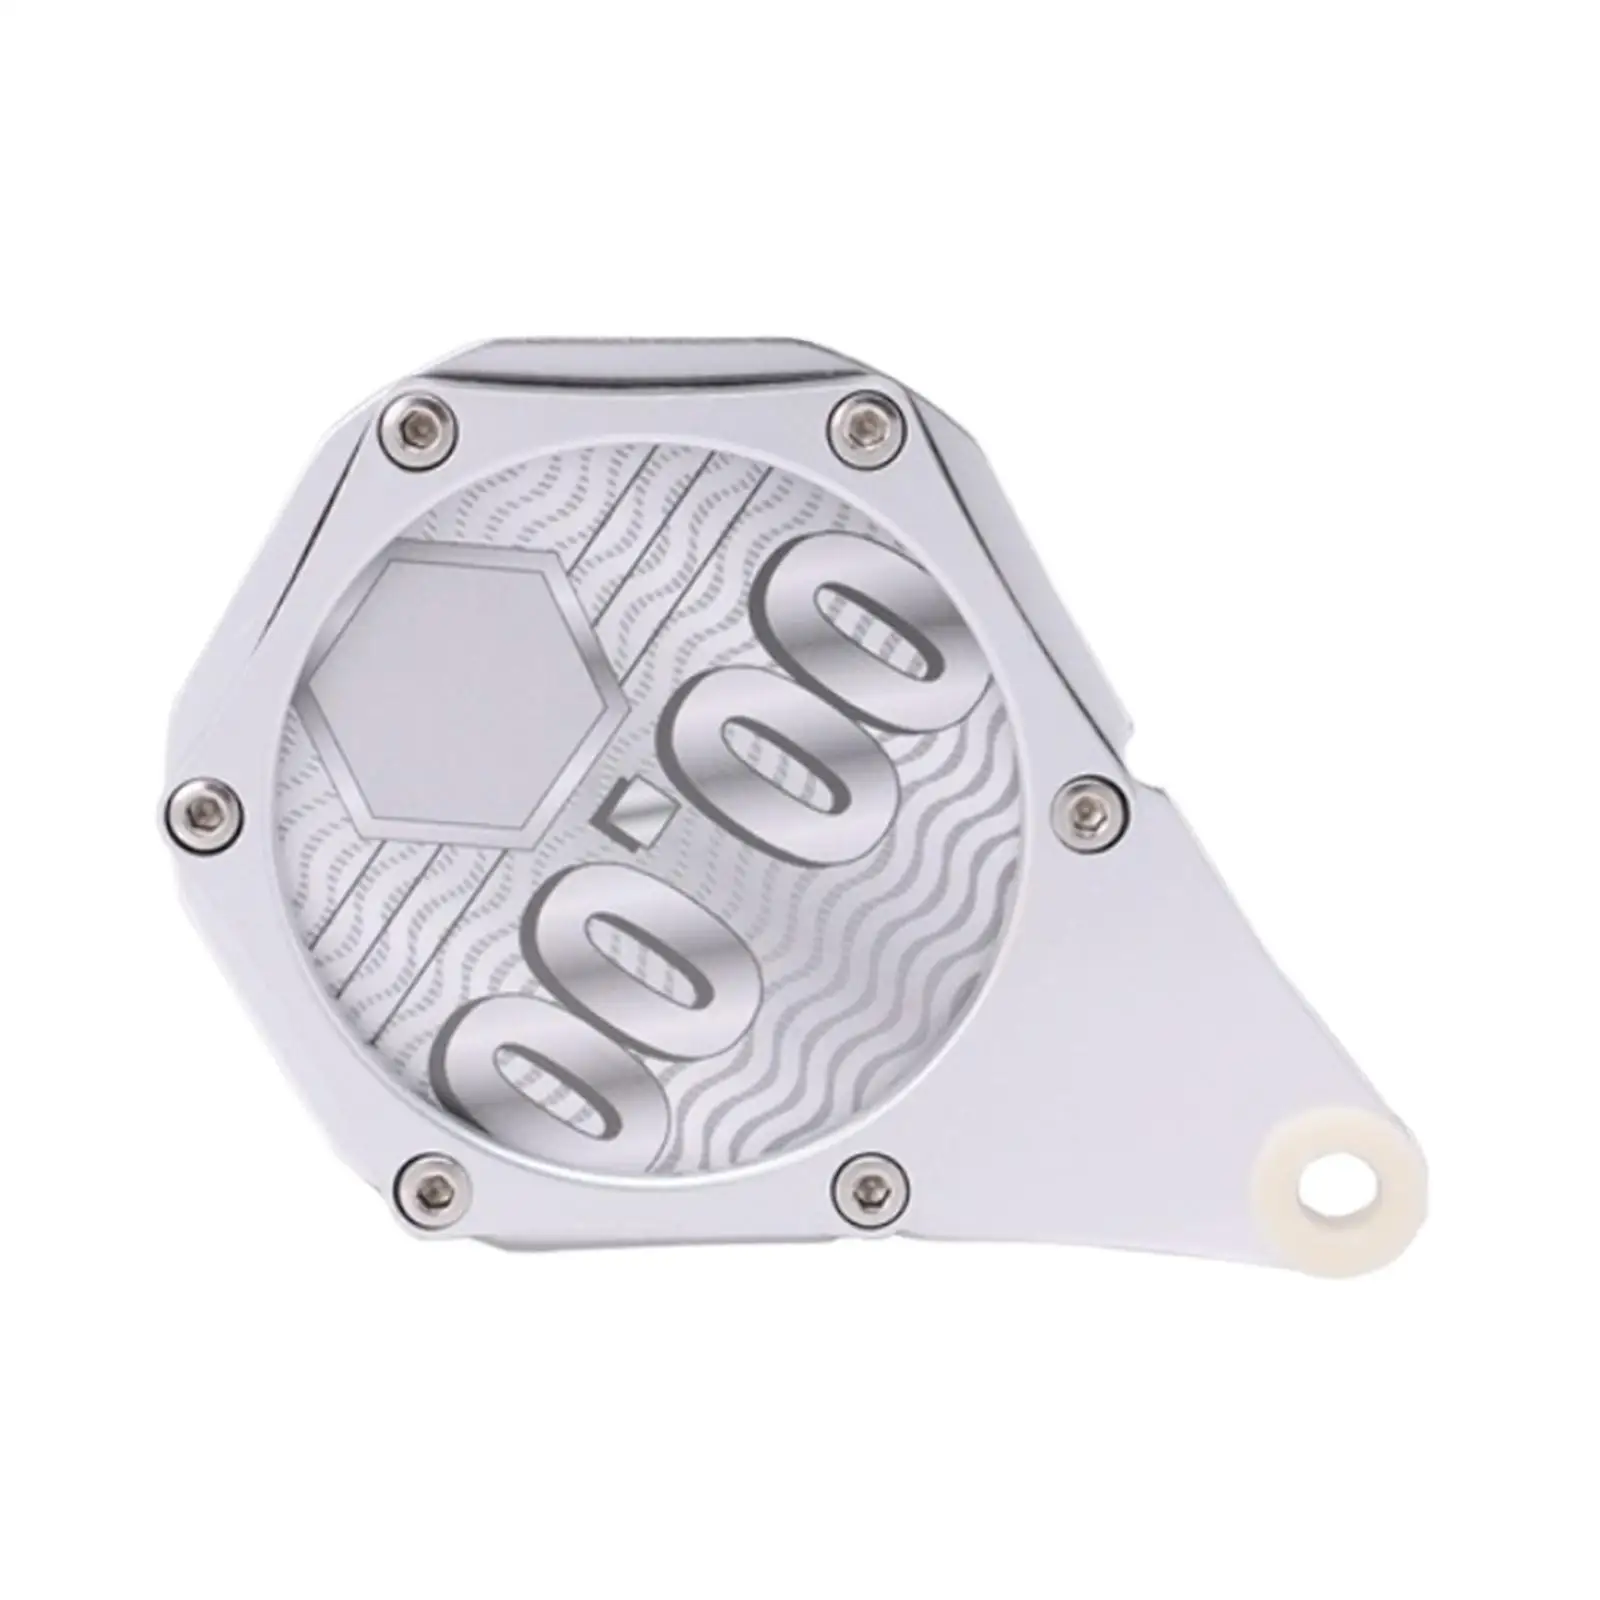 Hexagon Tax Disc Plate Tax Disc Tube Motorbike Tax Disc Holder for Scooter